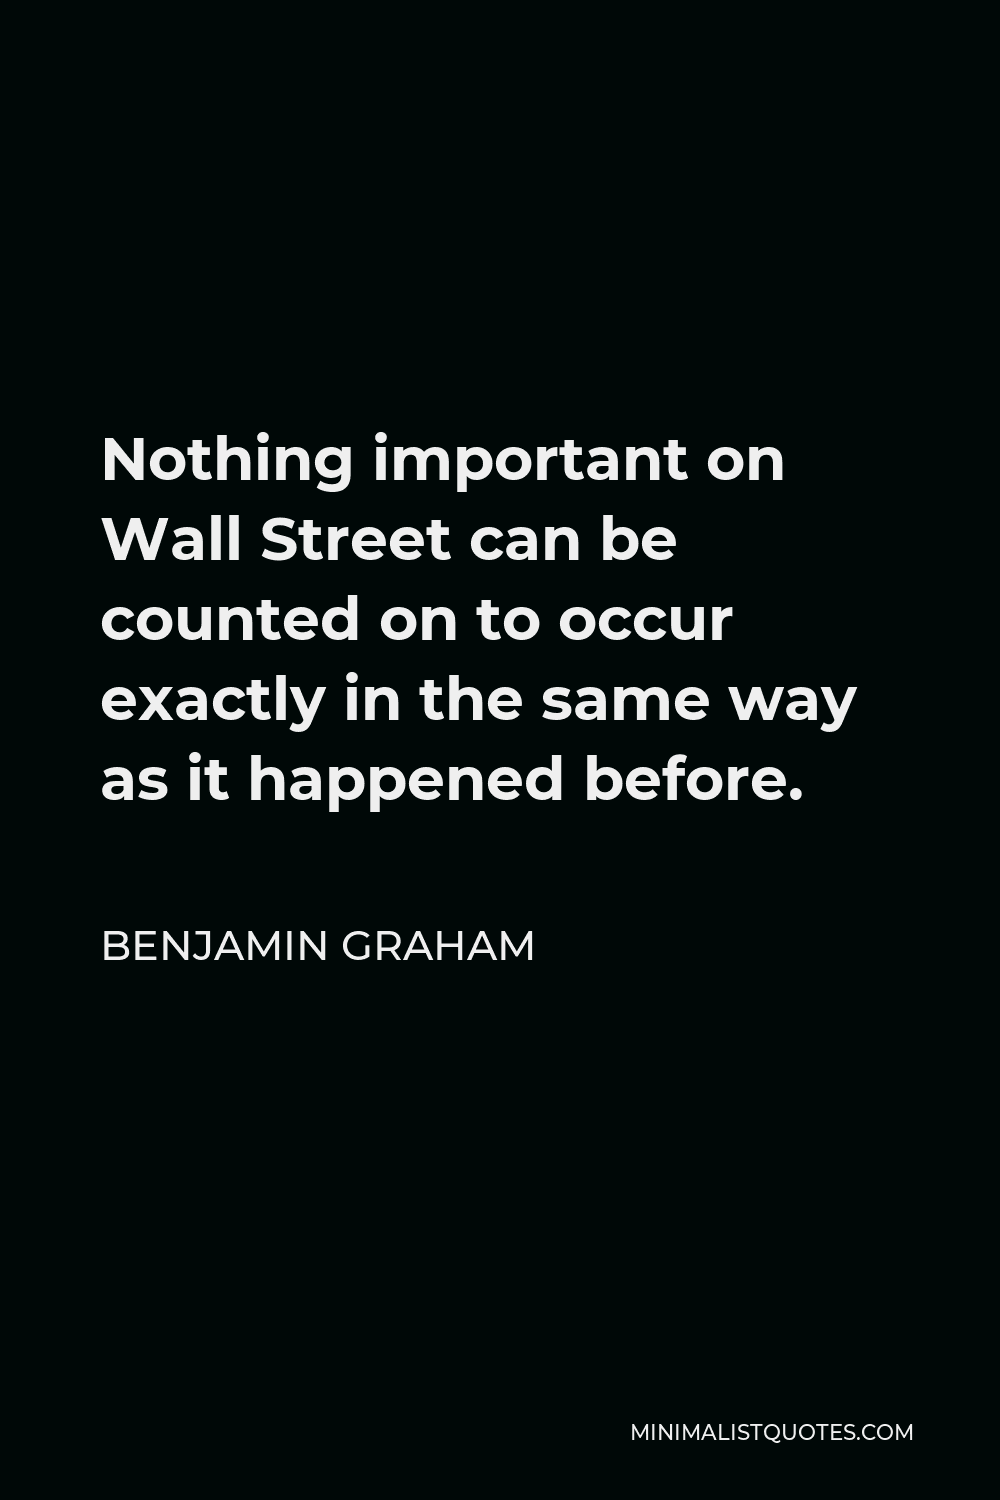 Benjamin Graham Quote - Nothing important on Wall Street can be counted on to occur exactly in the same way as it happened before.